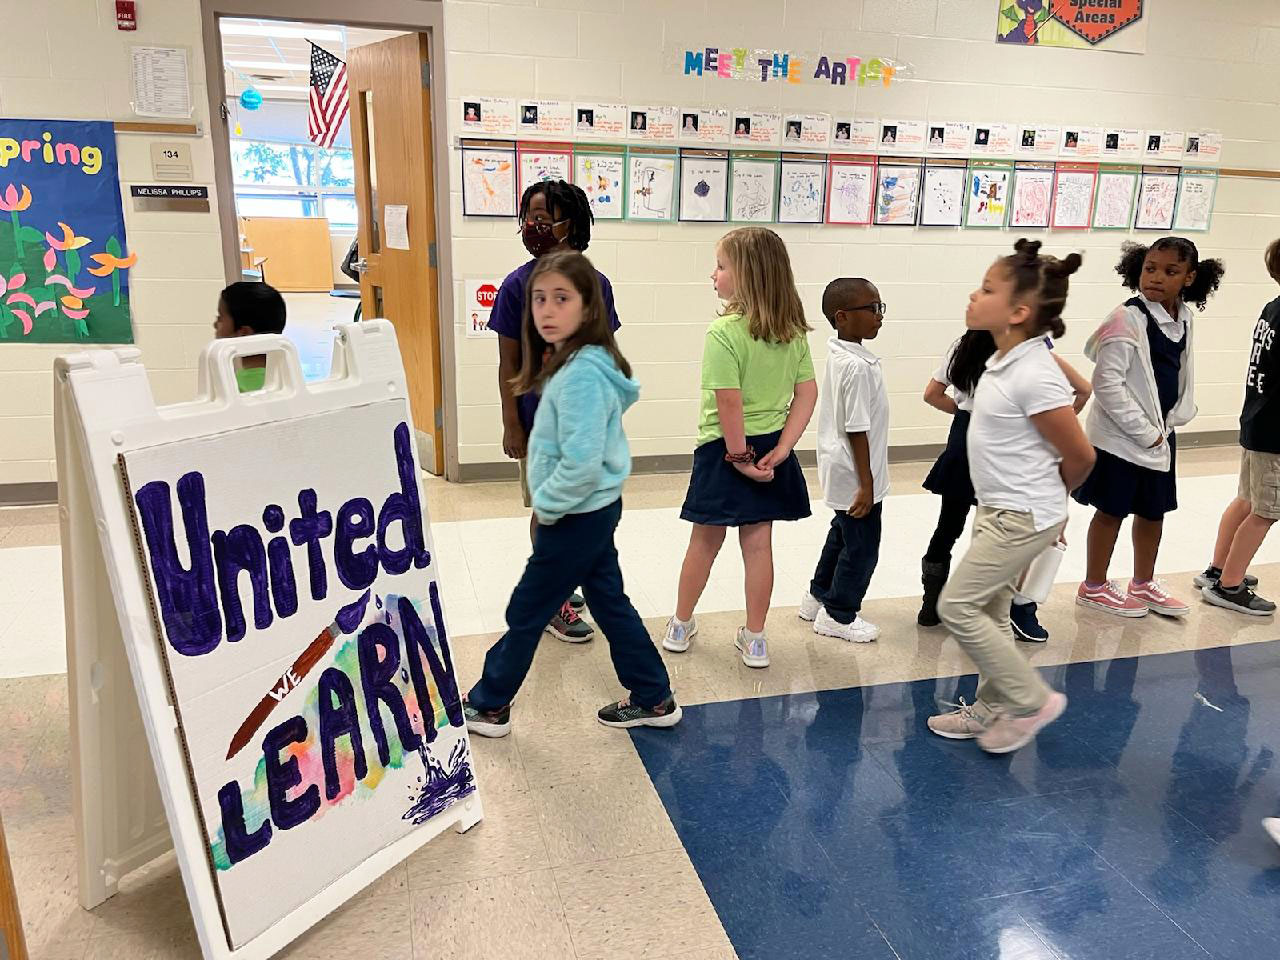 Students in the Hallway and the hand made United We Learn Sign